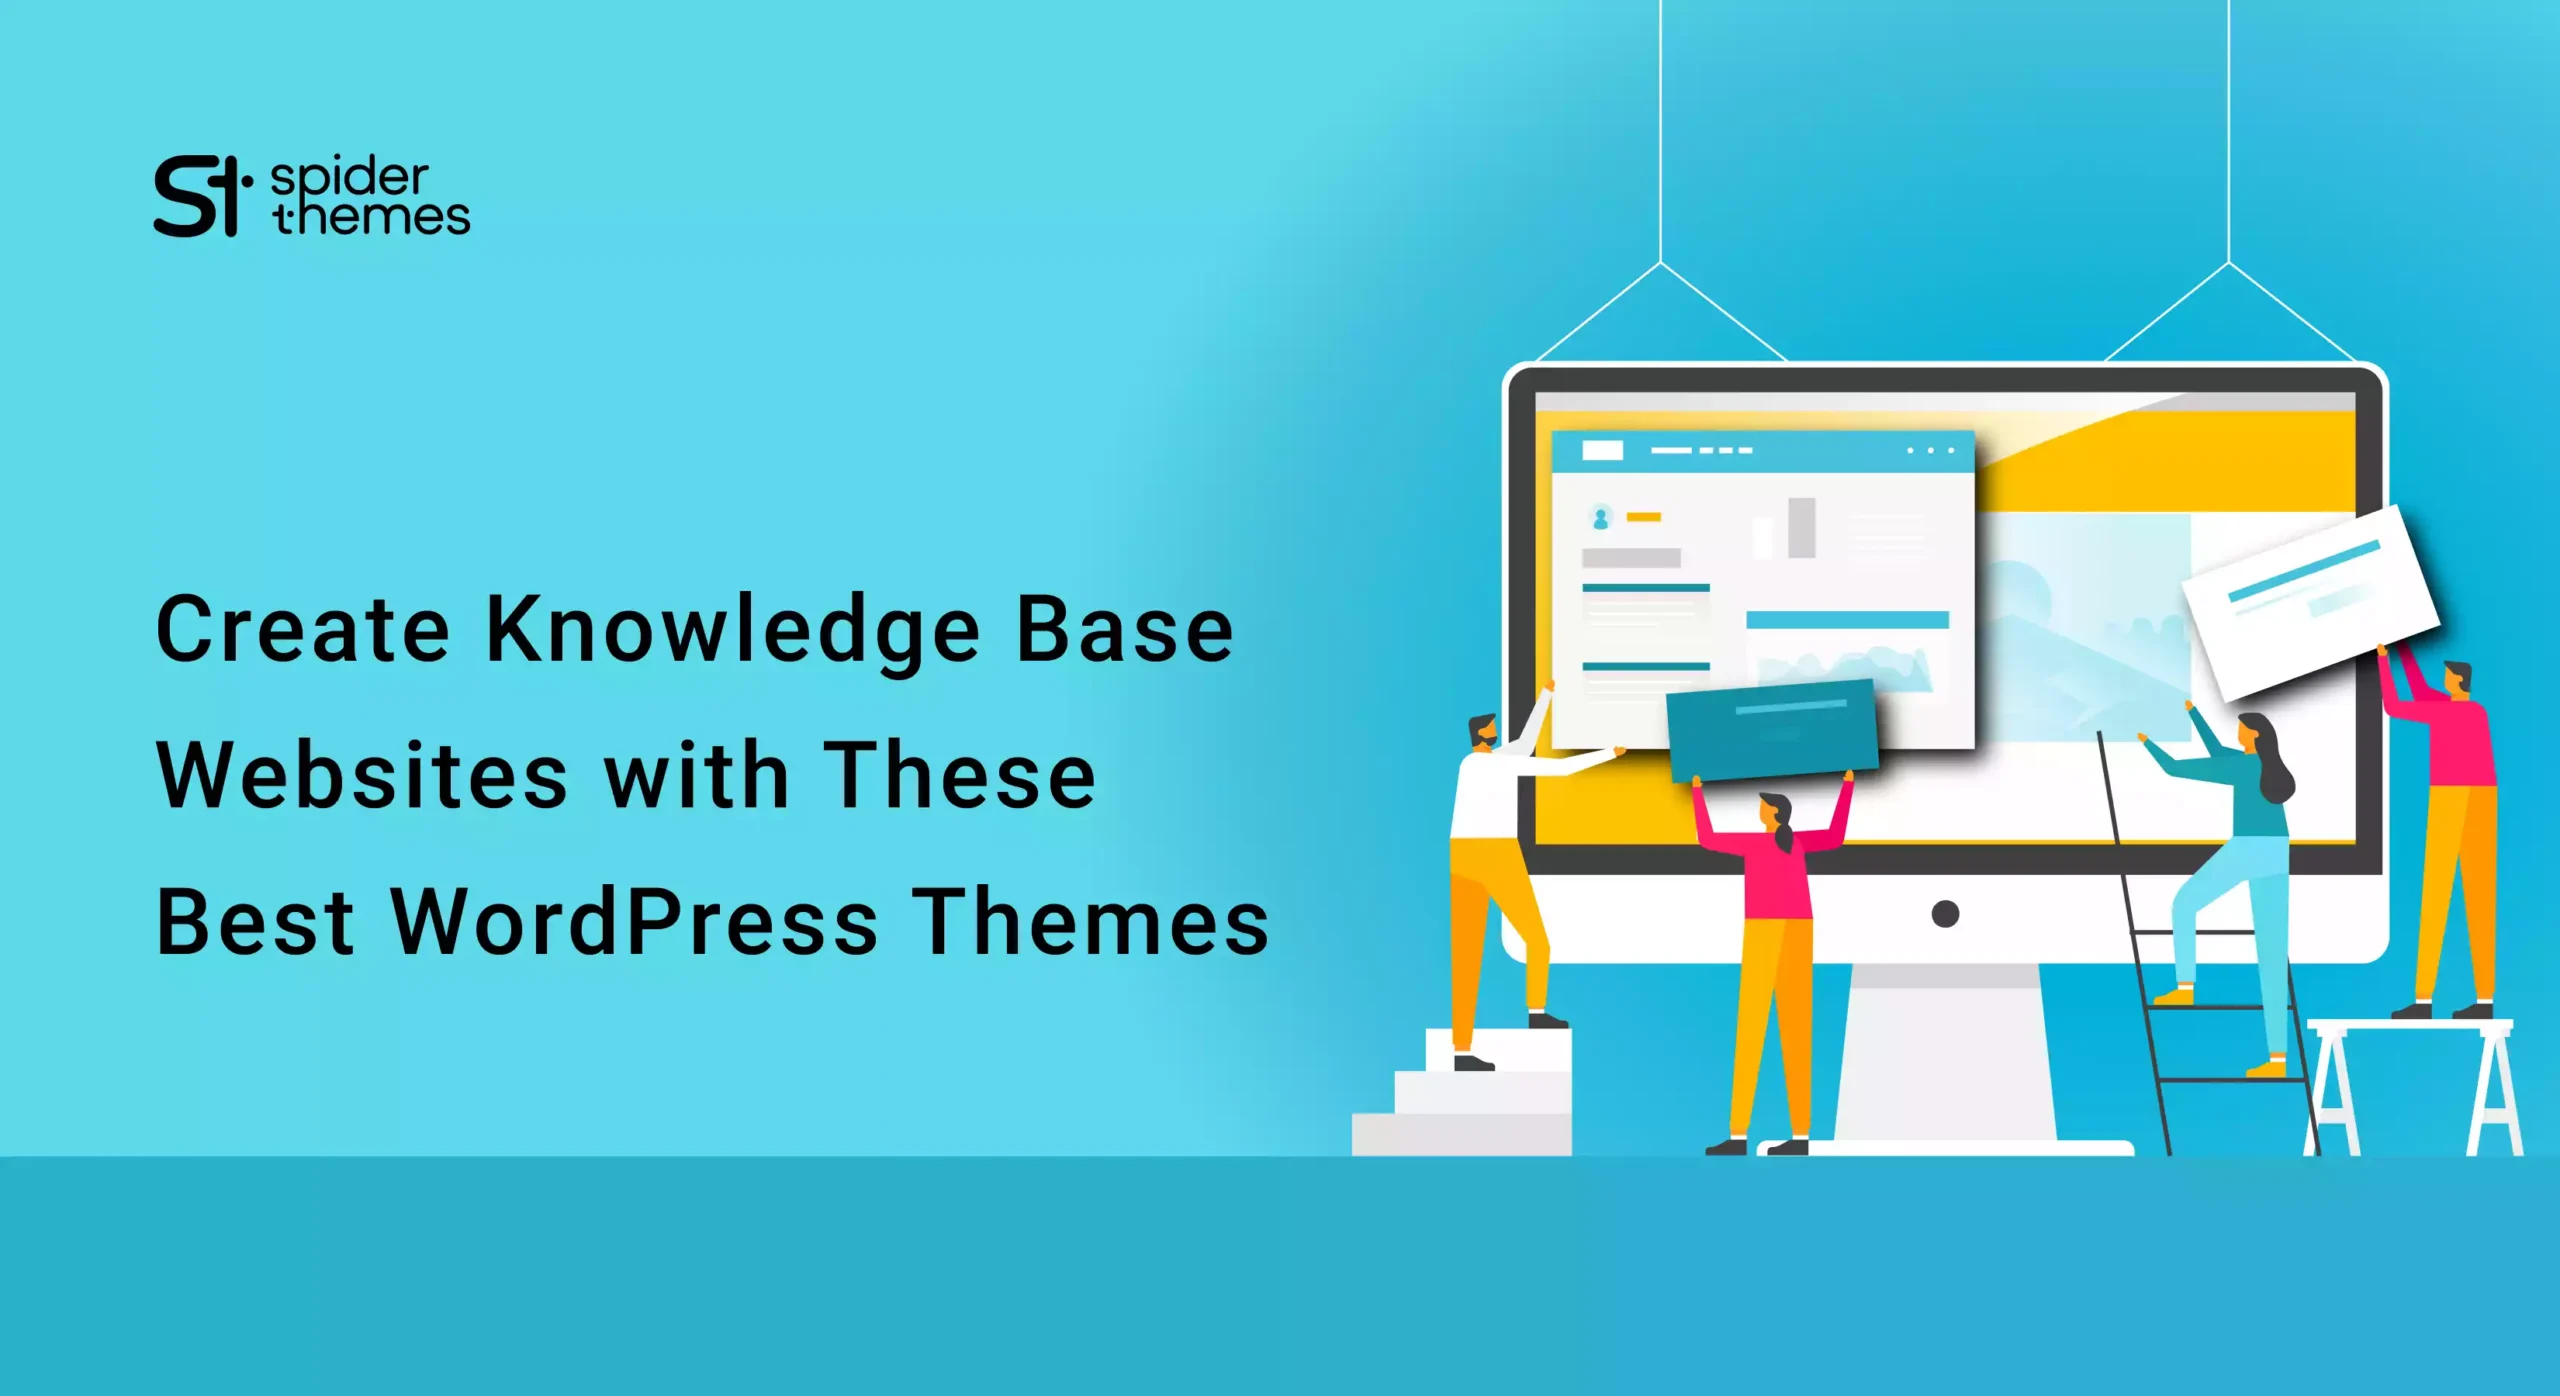 Create Knowledge Base Websites with These Best WordPress Themes